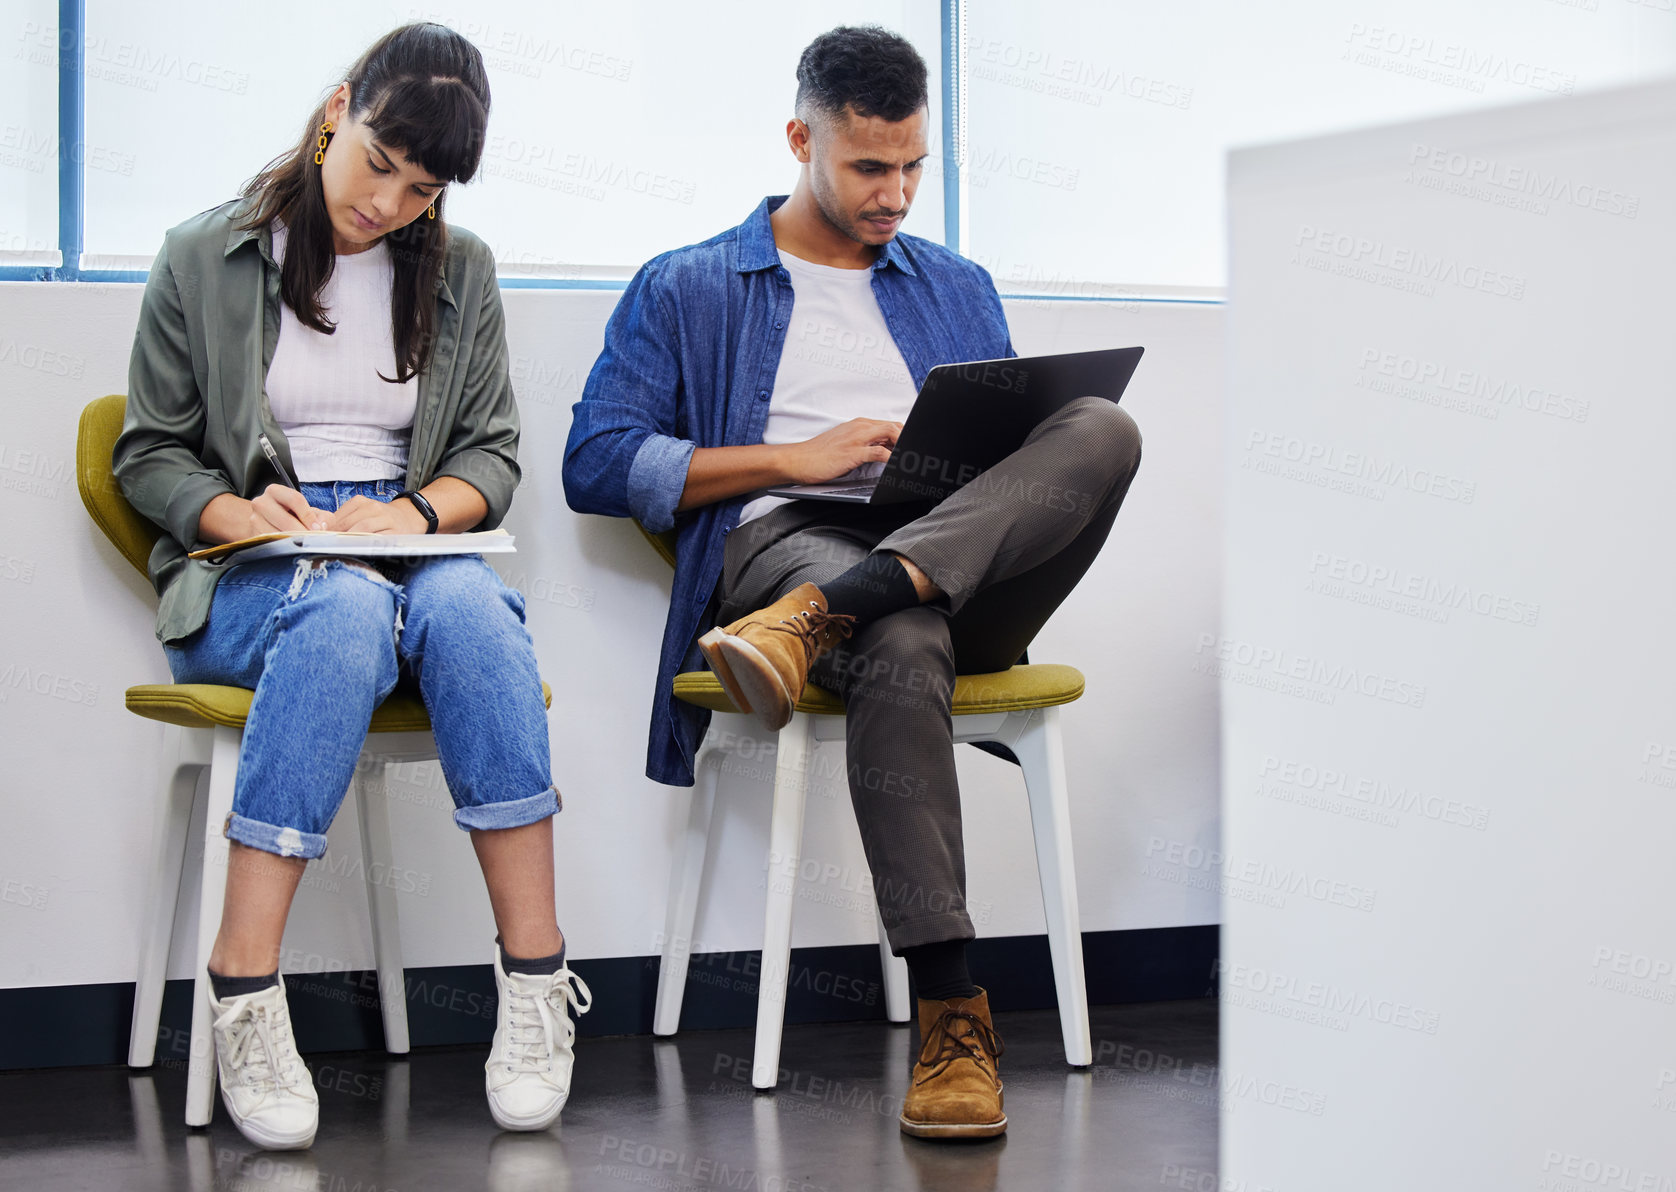 Buy stock photo Shot of two young adults using their devices while waiting to be interviewed in a modern office